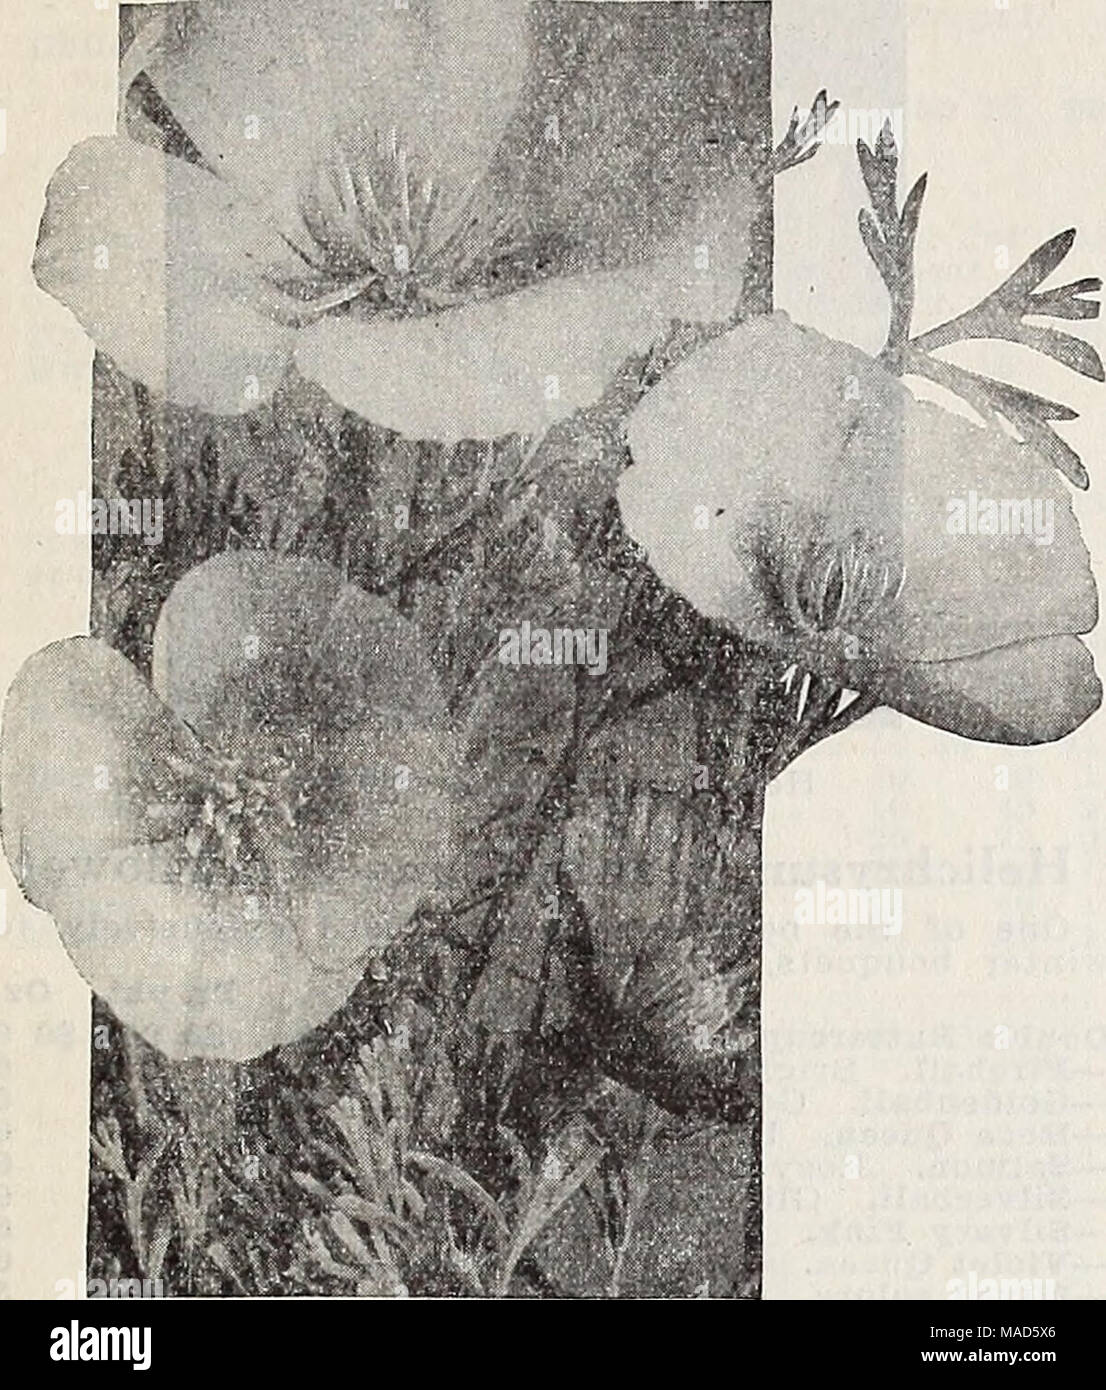 . Dreer's wholesale catalog for florists : winter spring summer 1937 . Eschscholtzia-California Poppies Eschscholtzia—California Poppy Tr. pkt. Oz. Anrantiaca. Golden orange. Very rich. .$0 10 $0 25 Chrome Queen. Rich chrome yellow 10 30 Crimson Kins'. Rich carmine-crimson.... 15 50 Dazzler. Rich flame scarlet 25 1 00 Geielia. Scarlet and gold 10 30 Purple Glow. Bright reddish purple 10 30 Rosy Queen. Soft flesh pink 10 30 Scarlet Beauty. Vivid scarlet 10 30 Vesuvius. Wallflower or coppery red 15 50 New Hybrids IXixecl. Contains a number of rich and unusual colors 15 50 Sing-le Mixed. % lb. 75 Stock Photo